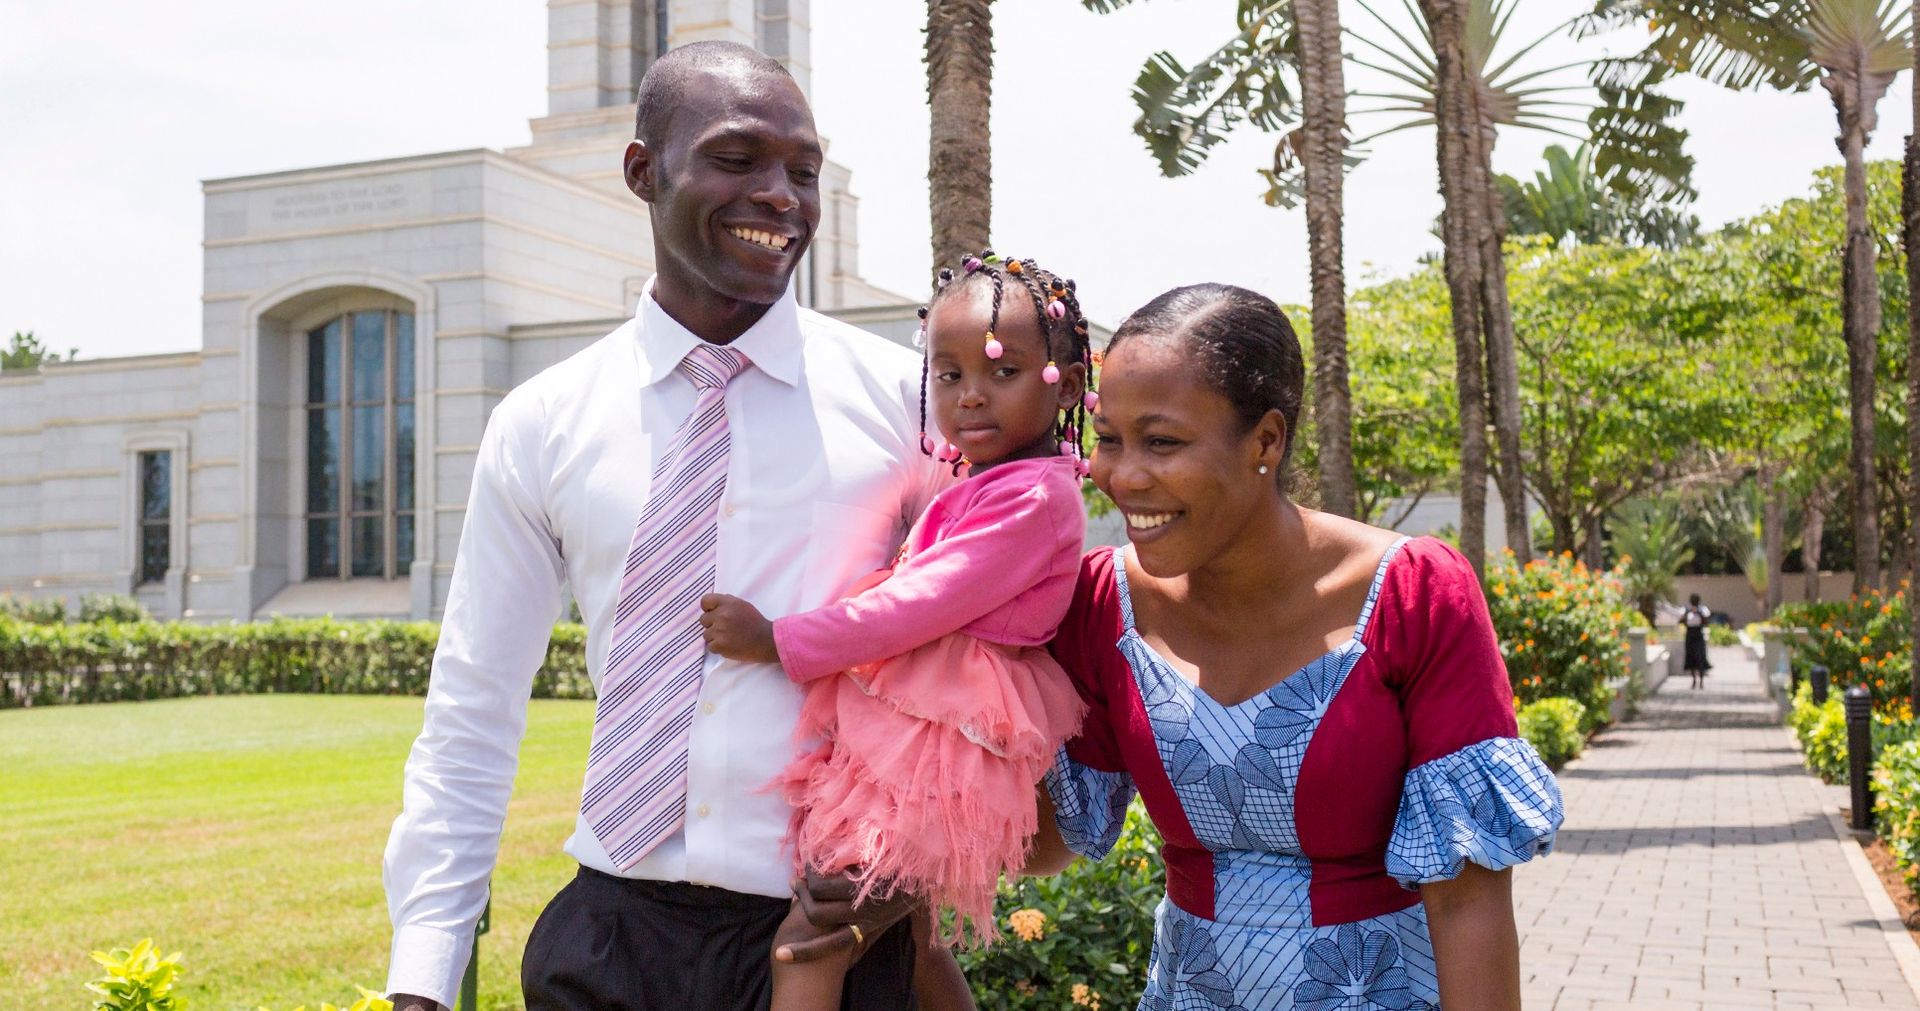 A Ghanaian family walks the grounds of the Accra Ghana Temple together.